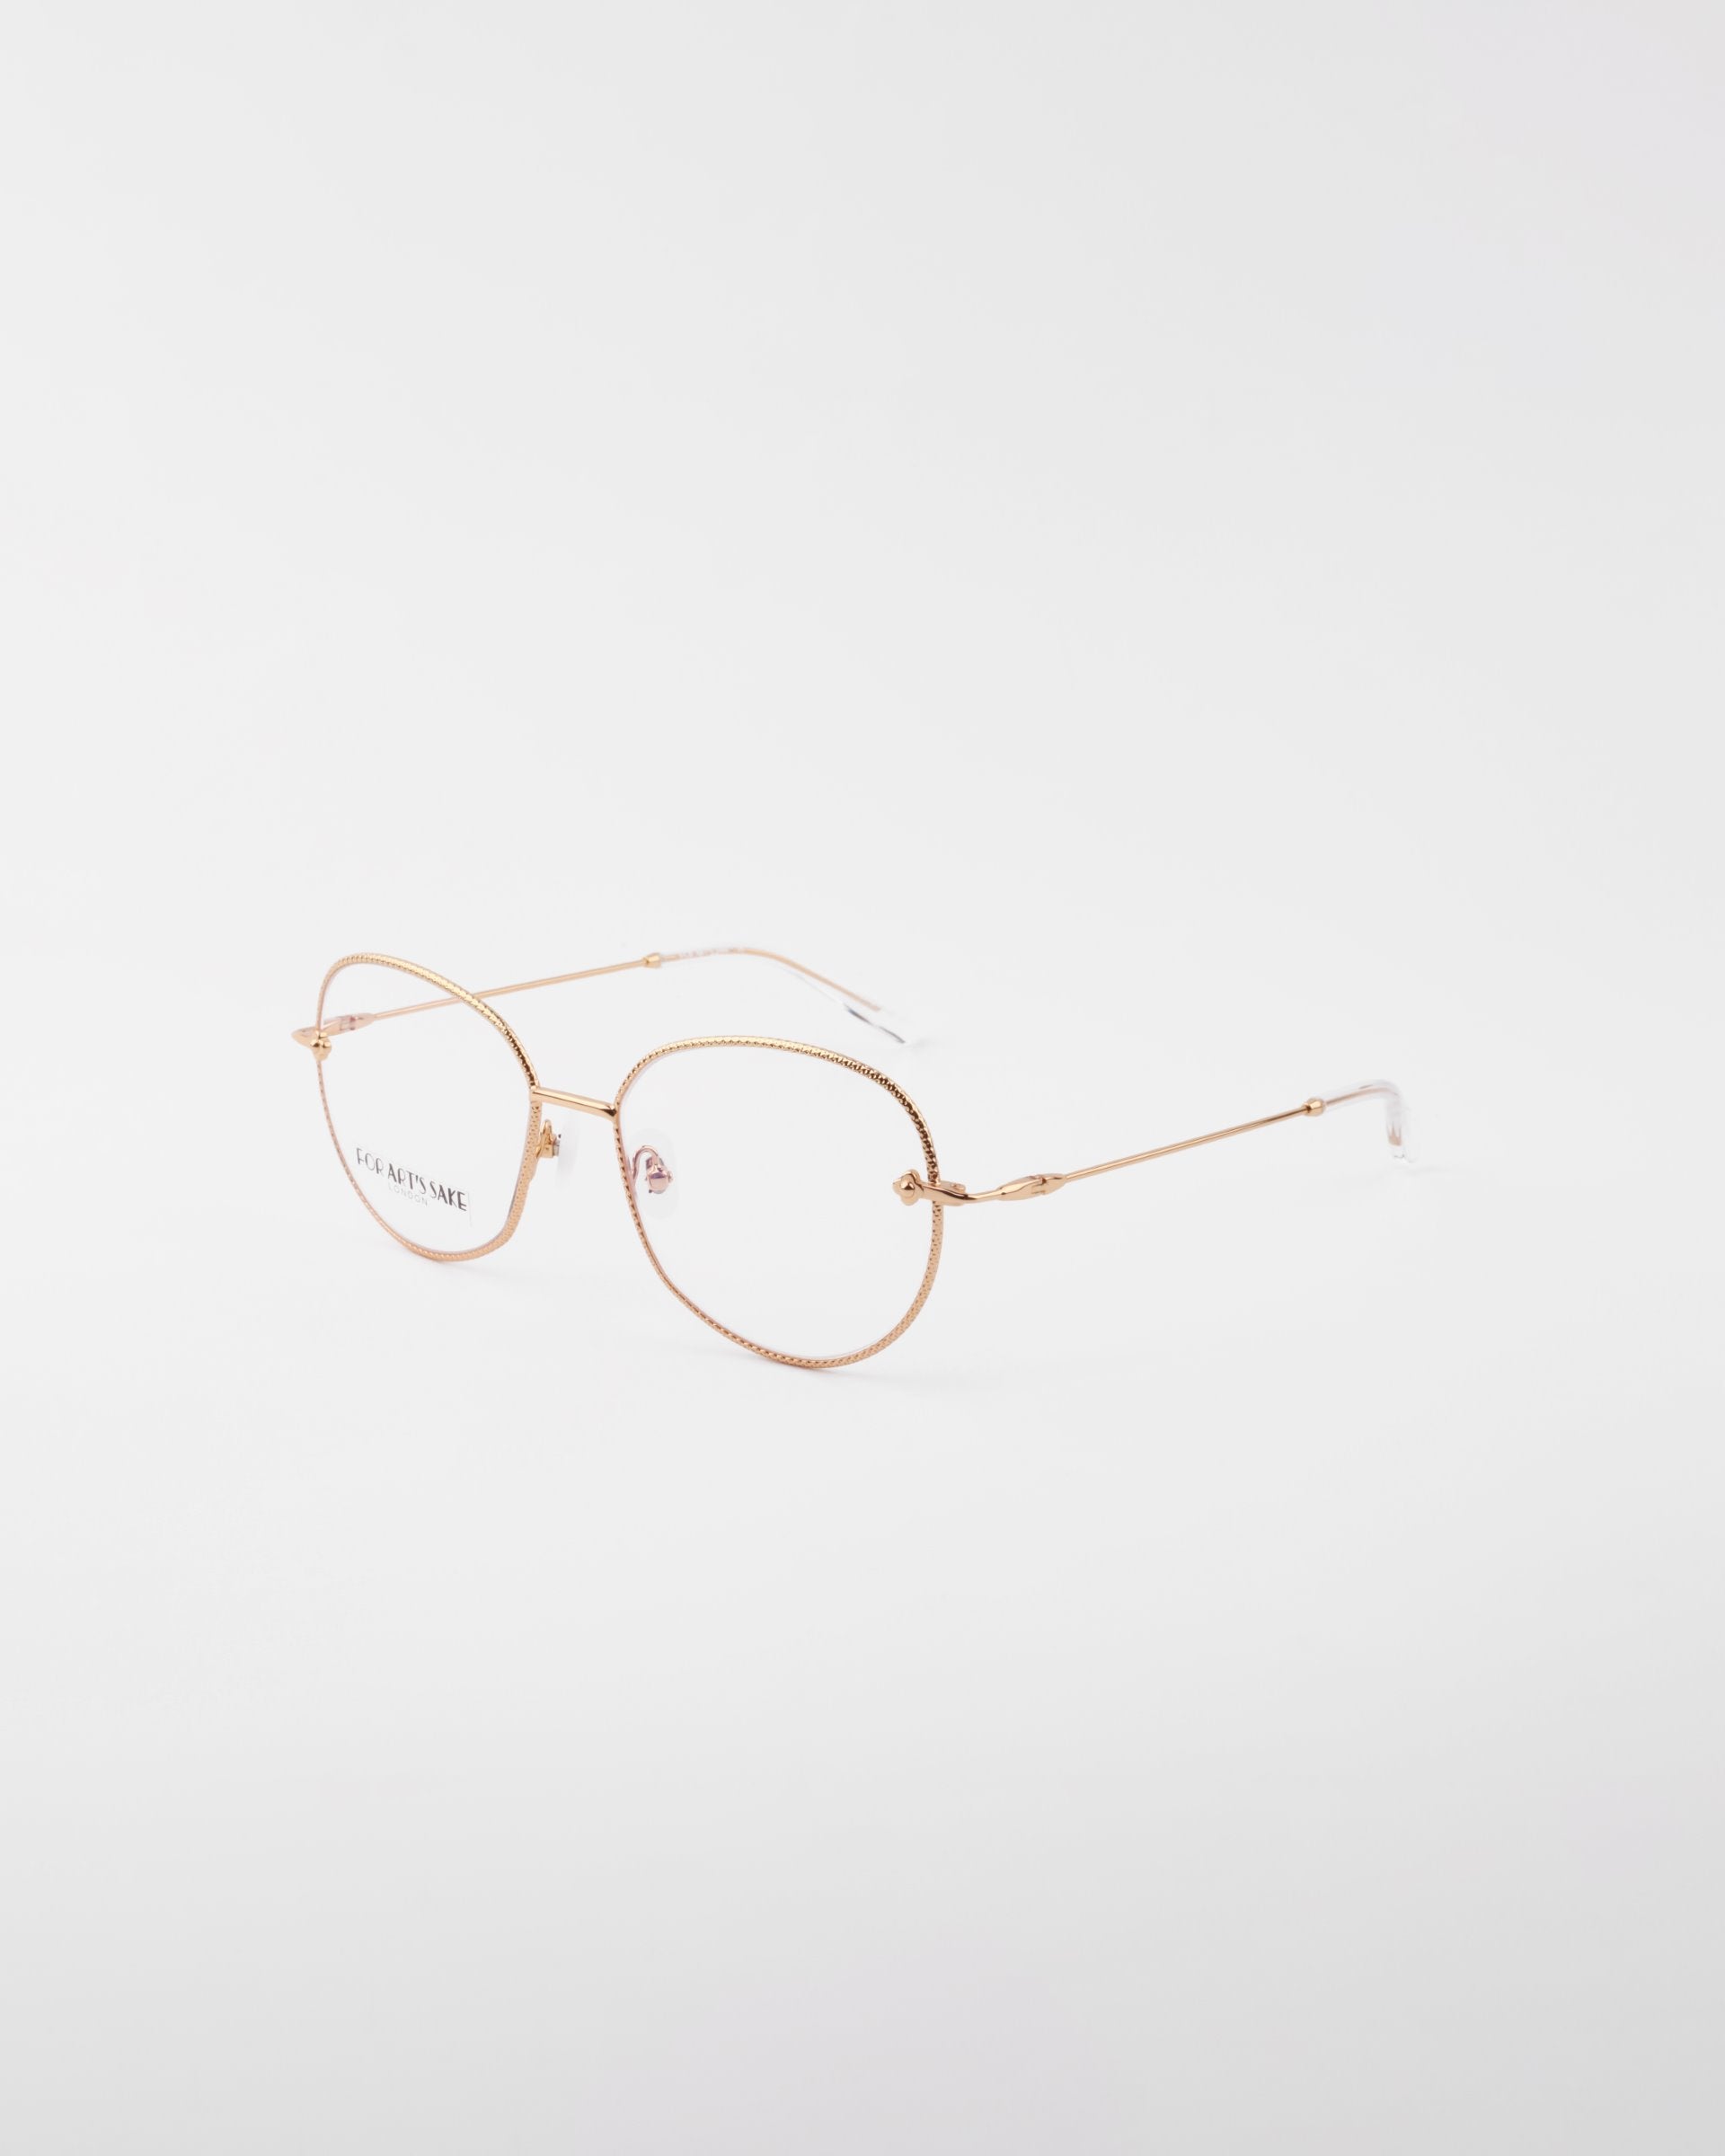 A pair of gold-framed, round eyeglasses with clear lenses is set against a plain white background. The delicate, handmade Jasmine eyewear by For Art's Sake® features thin temples with a subtle texture, and the nose pads are transparent. The frame is crafted from gold-plated stainless steel for added elegance and durability.